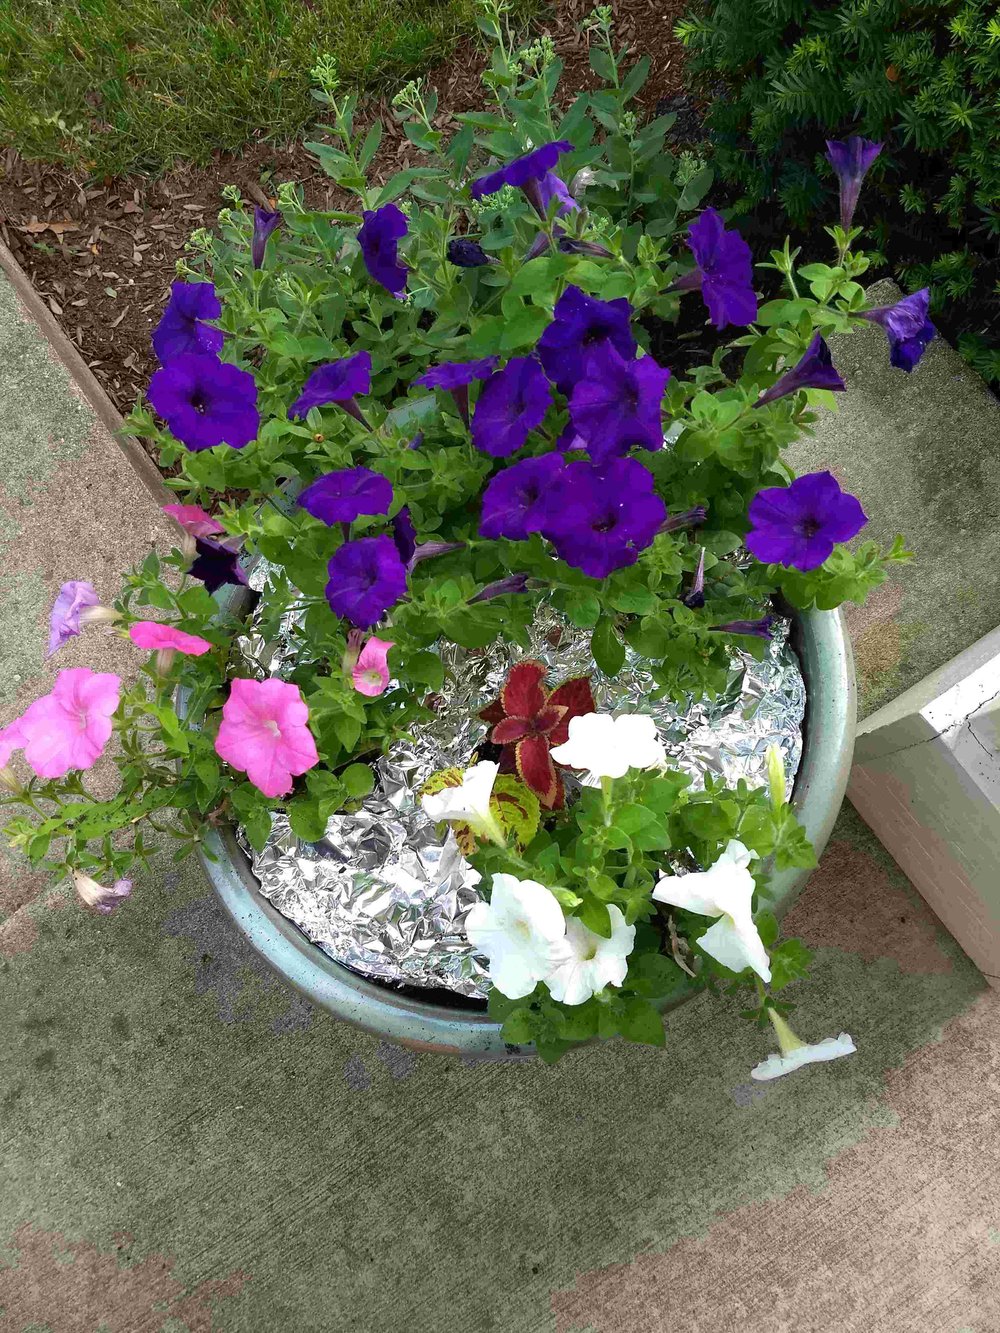 Flowers surrounded by tin foil to prevent chipmunks from digging in her pots.